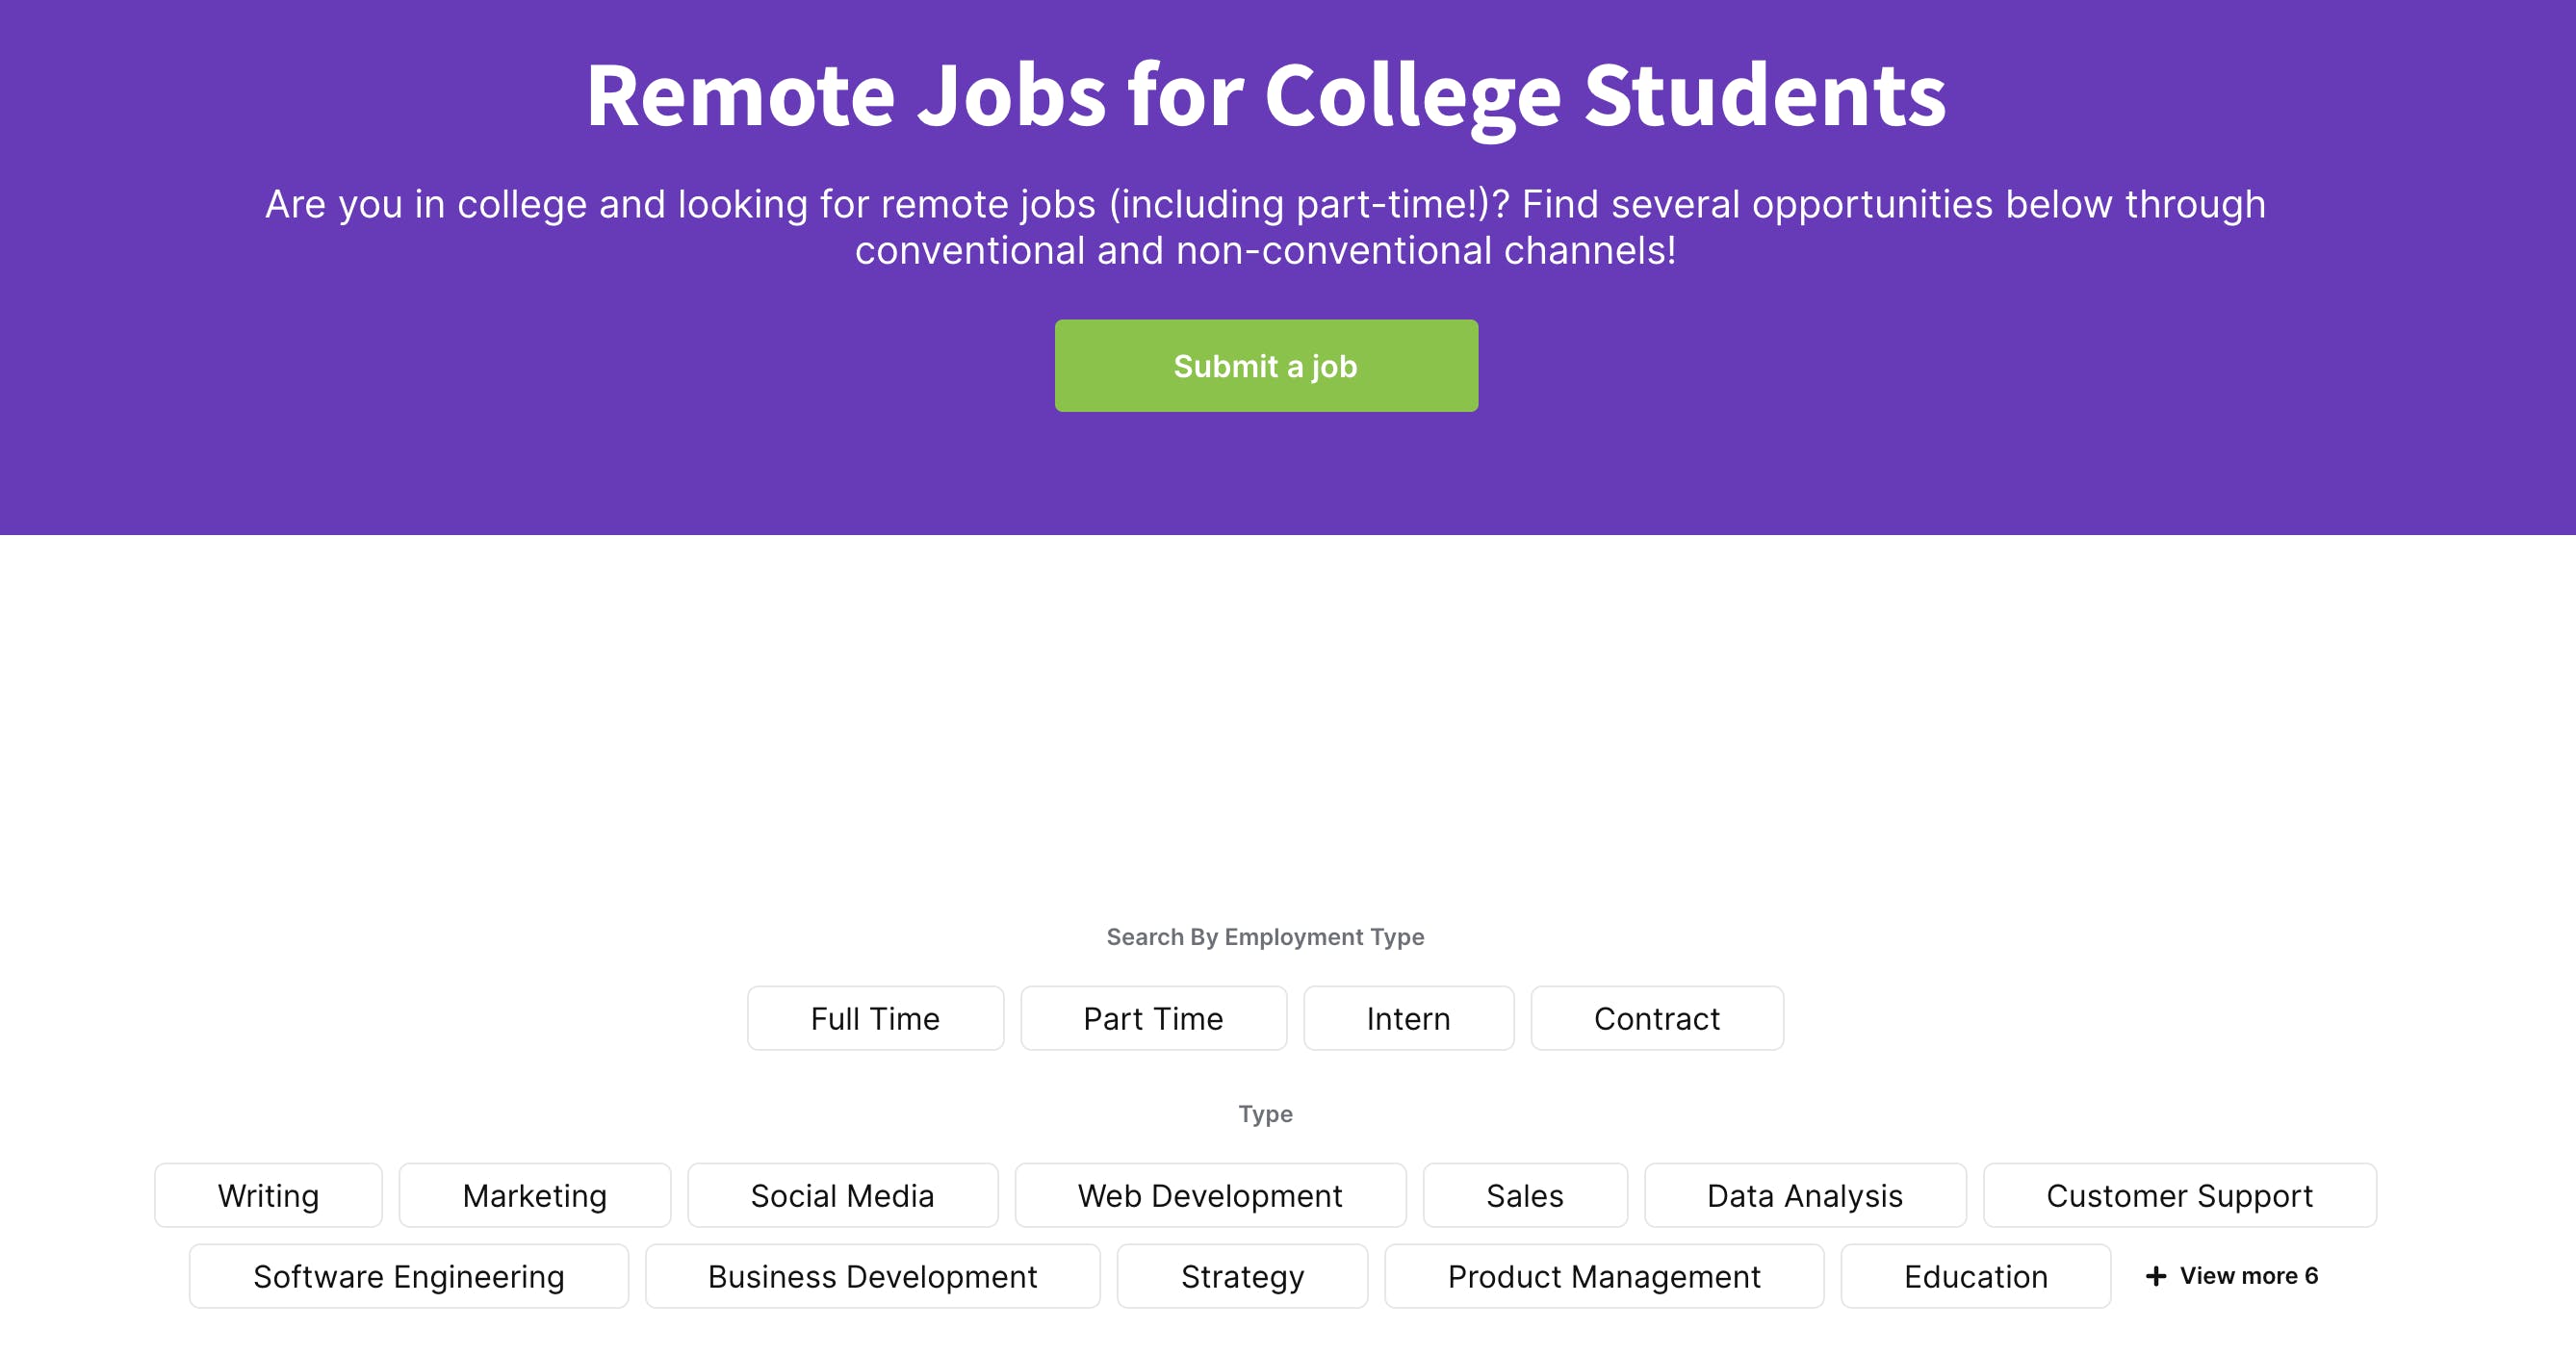 Remote Jobs for College Students media 1